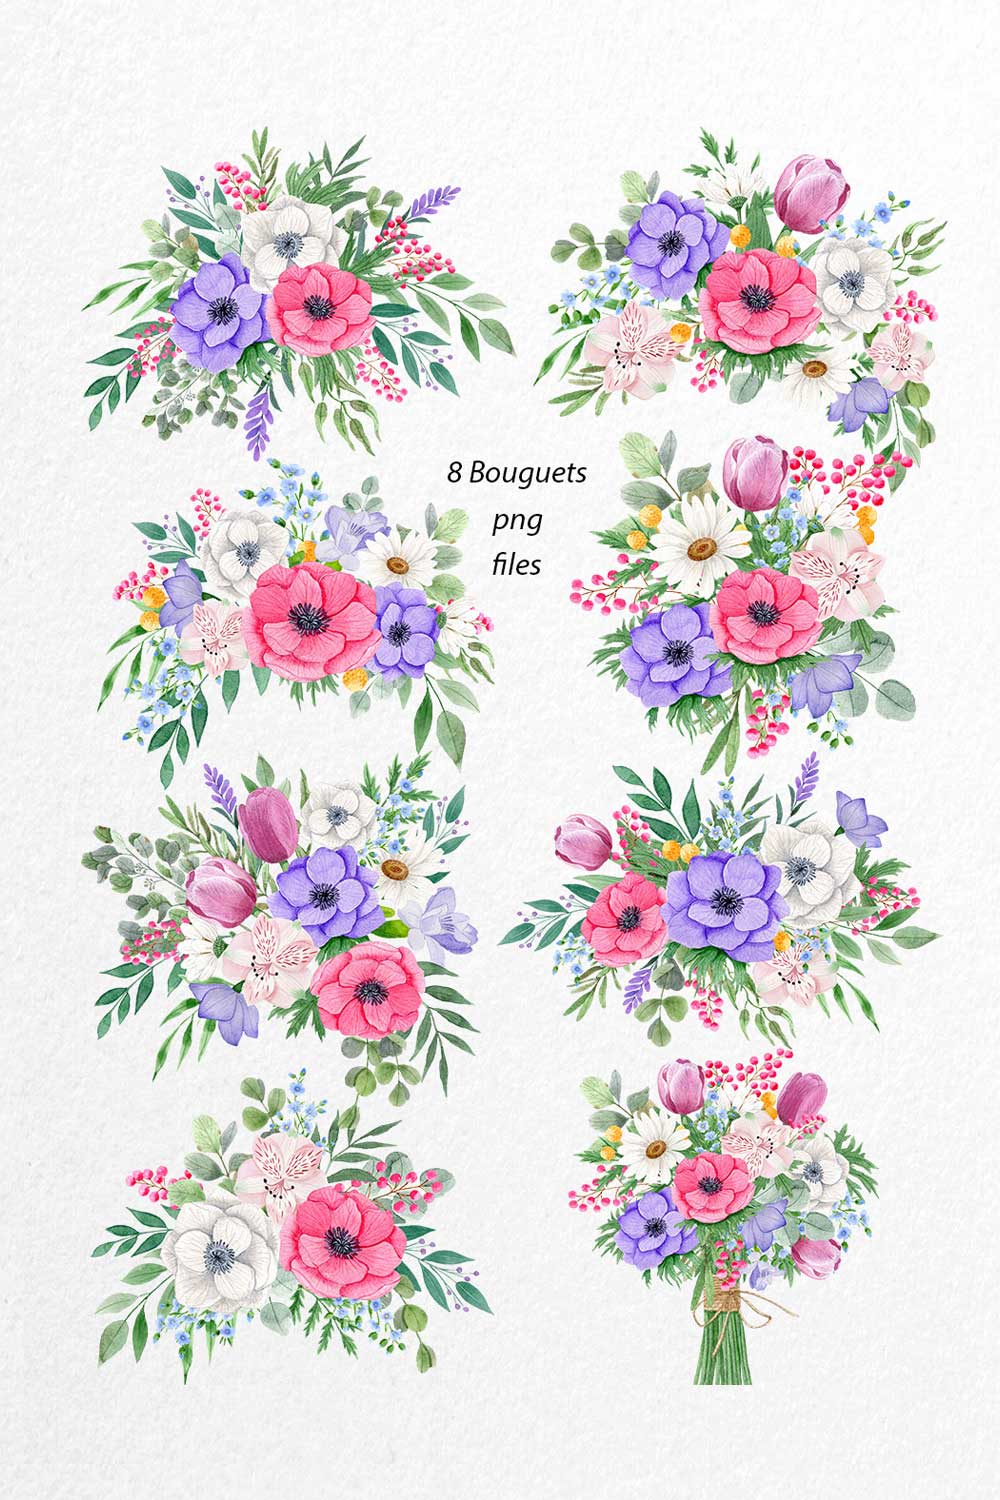 Watercolor Flower Bouquets of Anemones, Tulips, Daisies pinterest image.